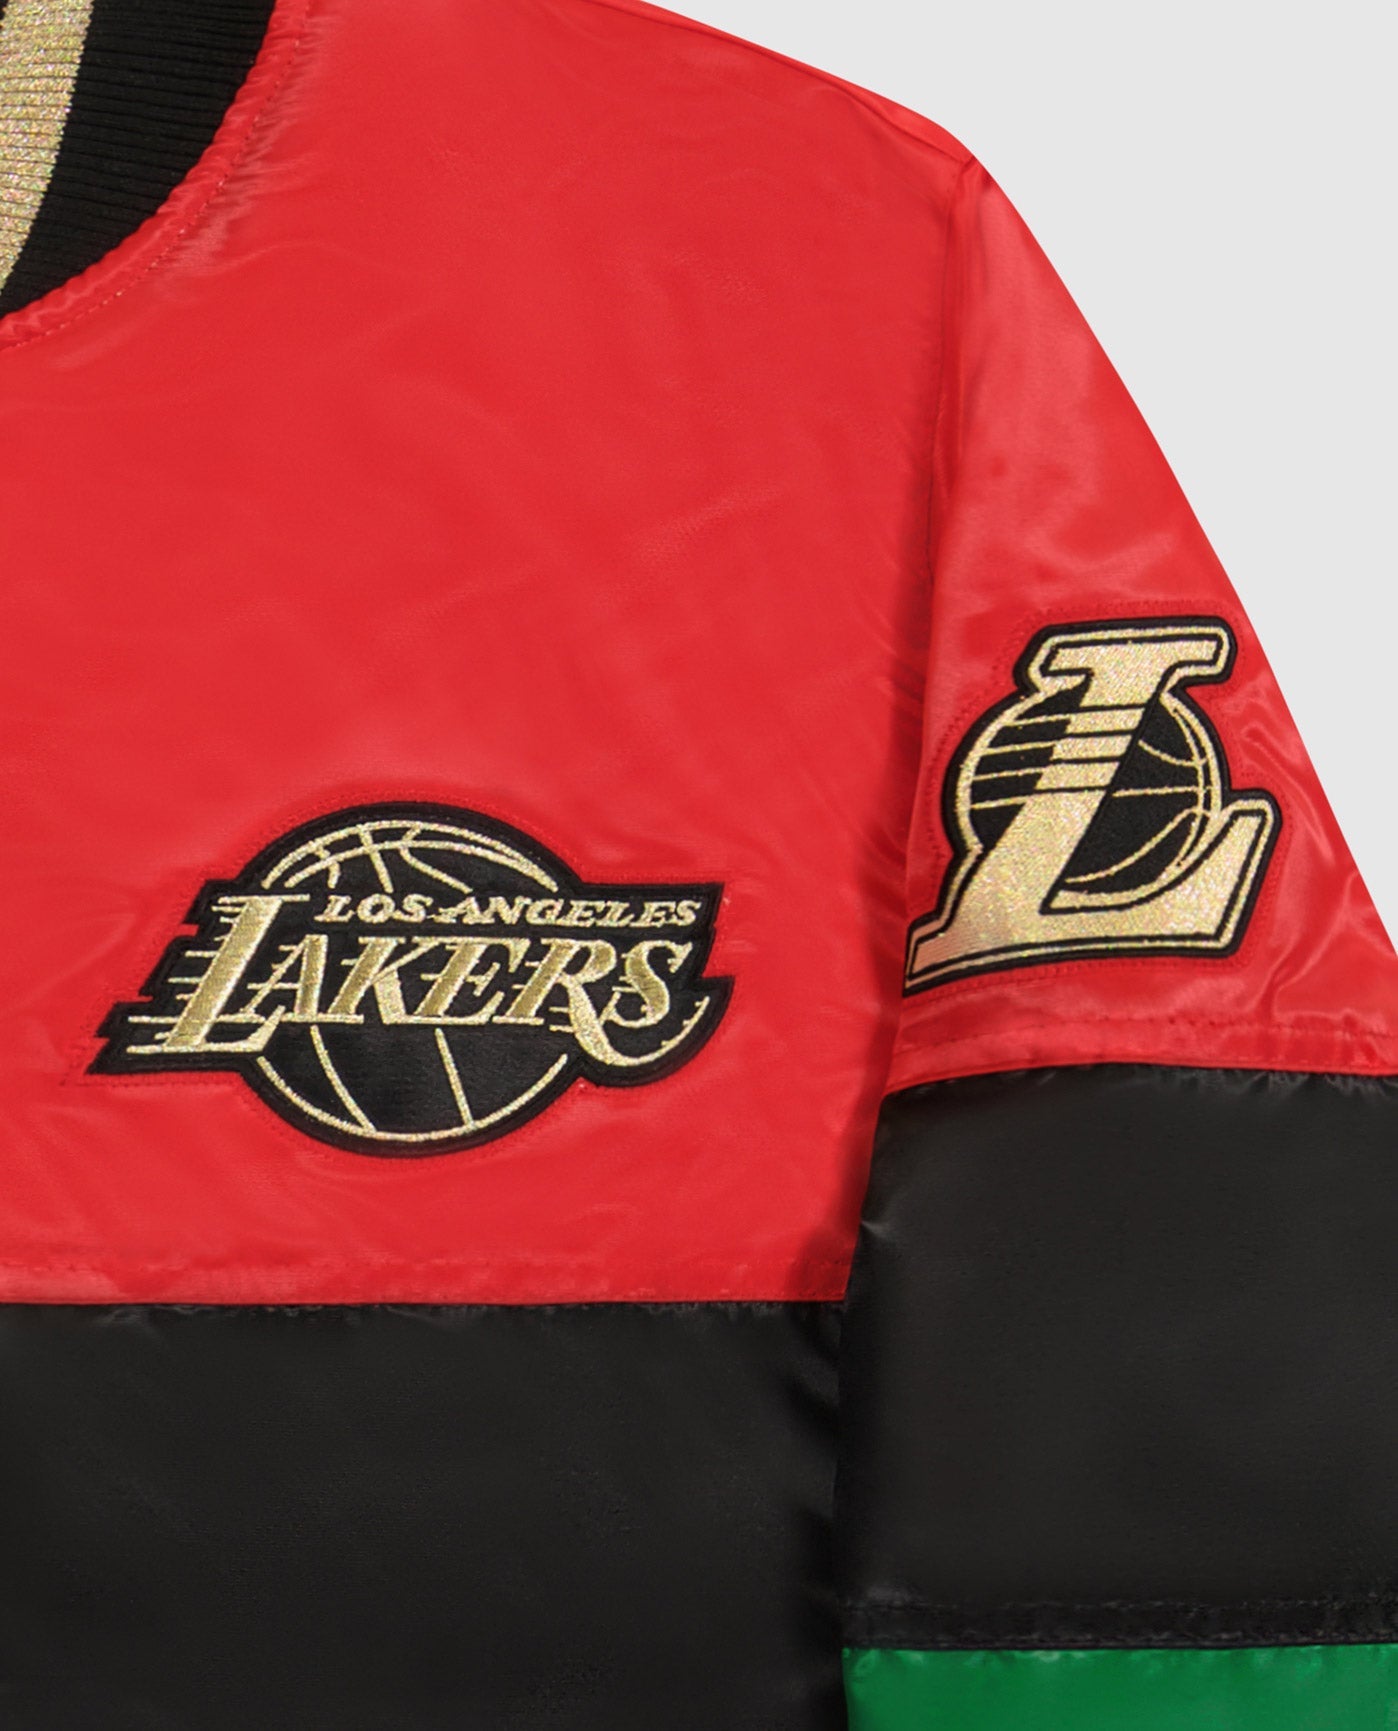 LOS ANGELES LAKERS logo on top left chest and sleeves | Lakers Red Black Green